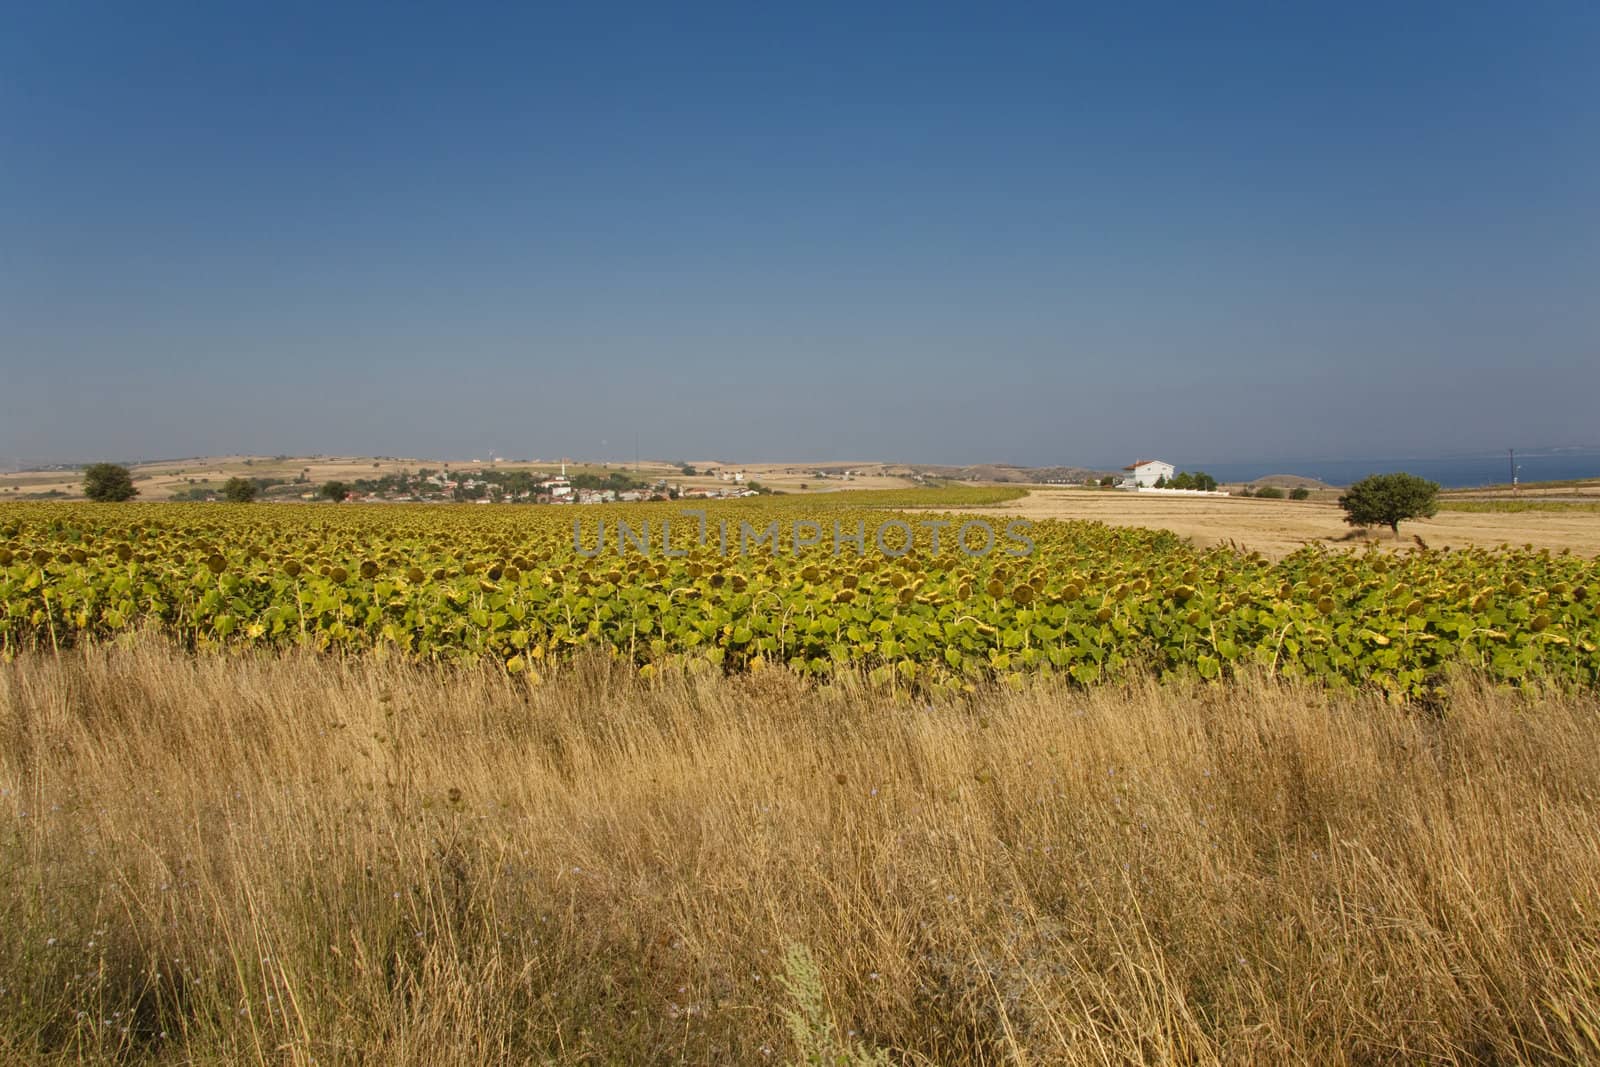 View on field with sunflowers in Turkey. In background sea.